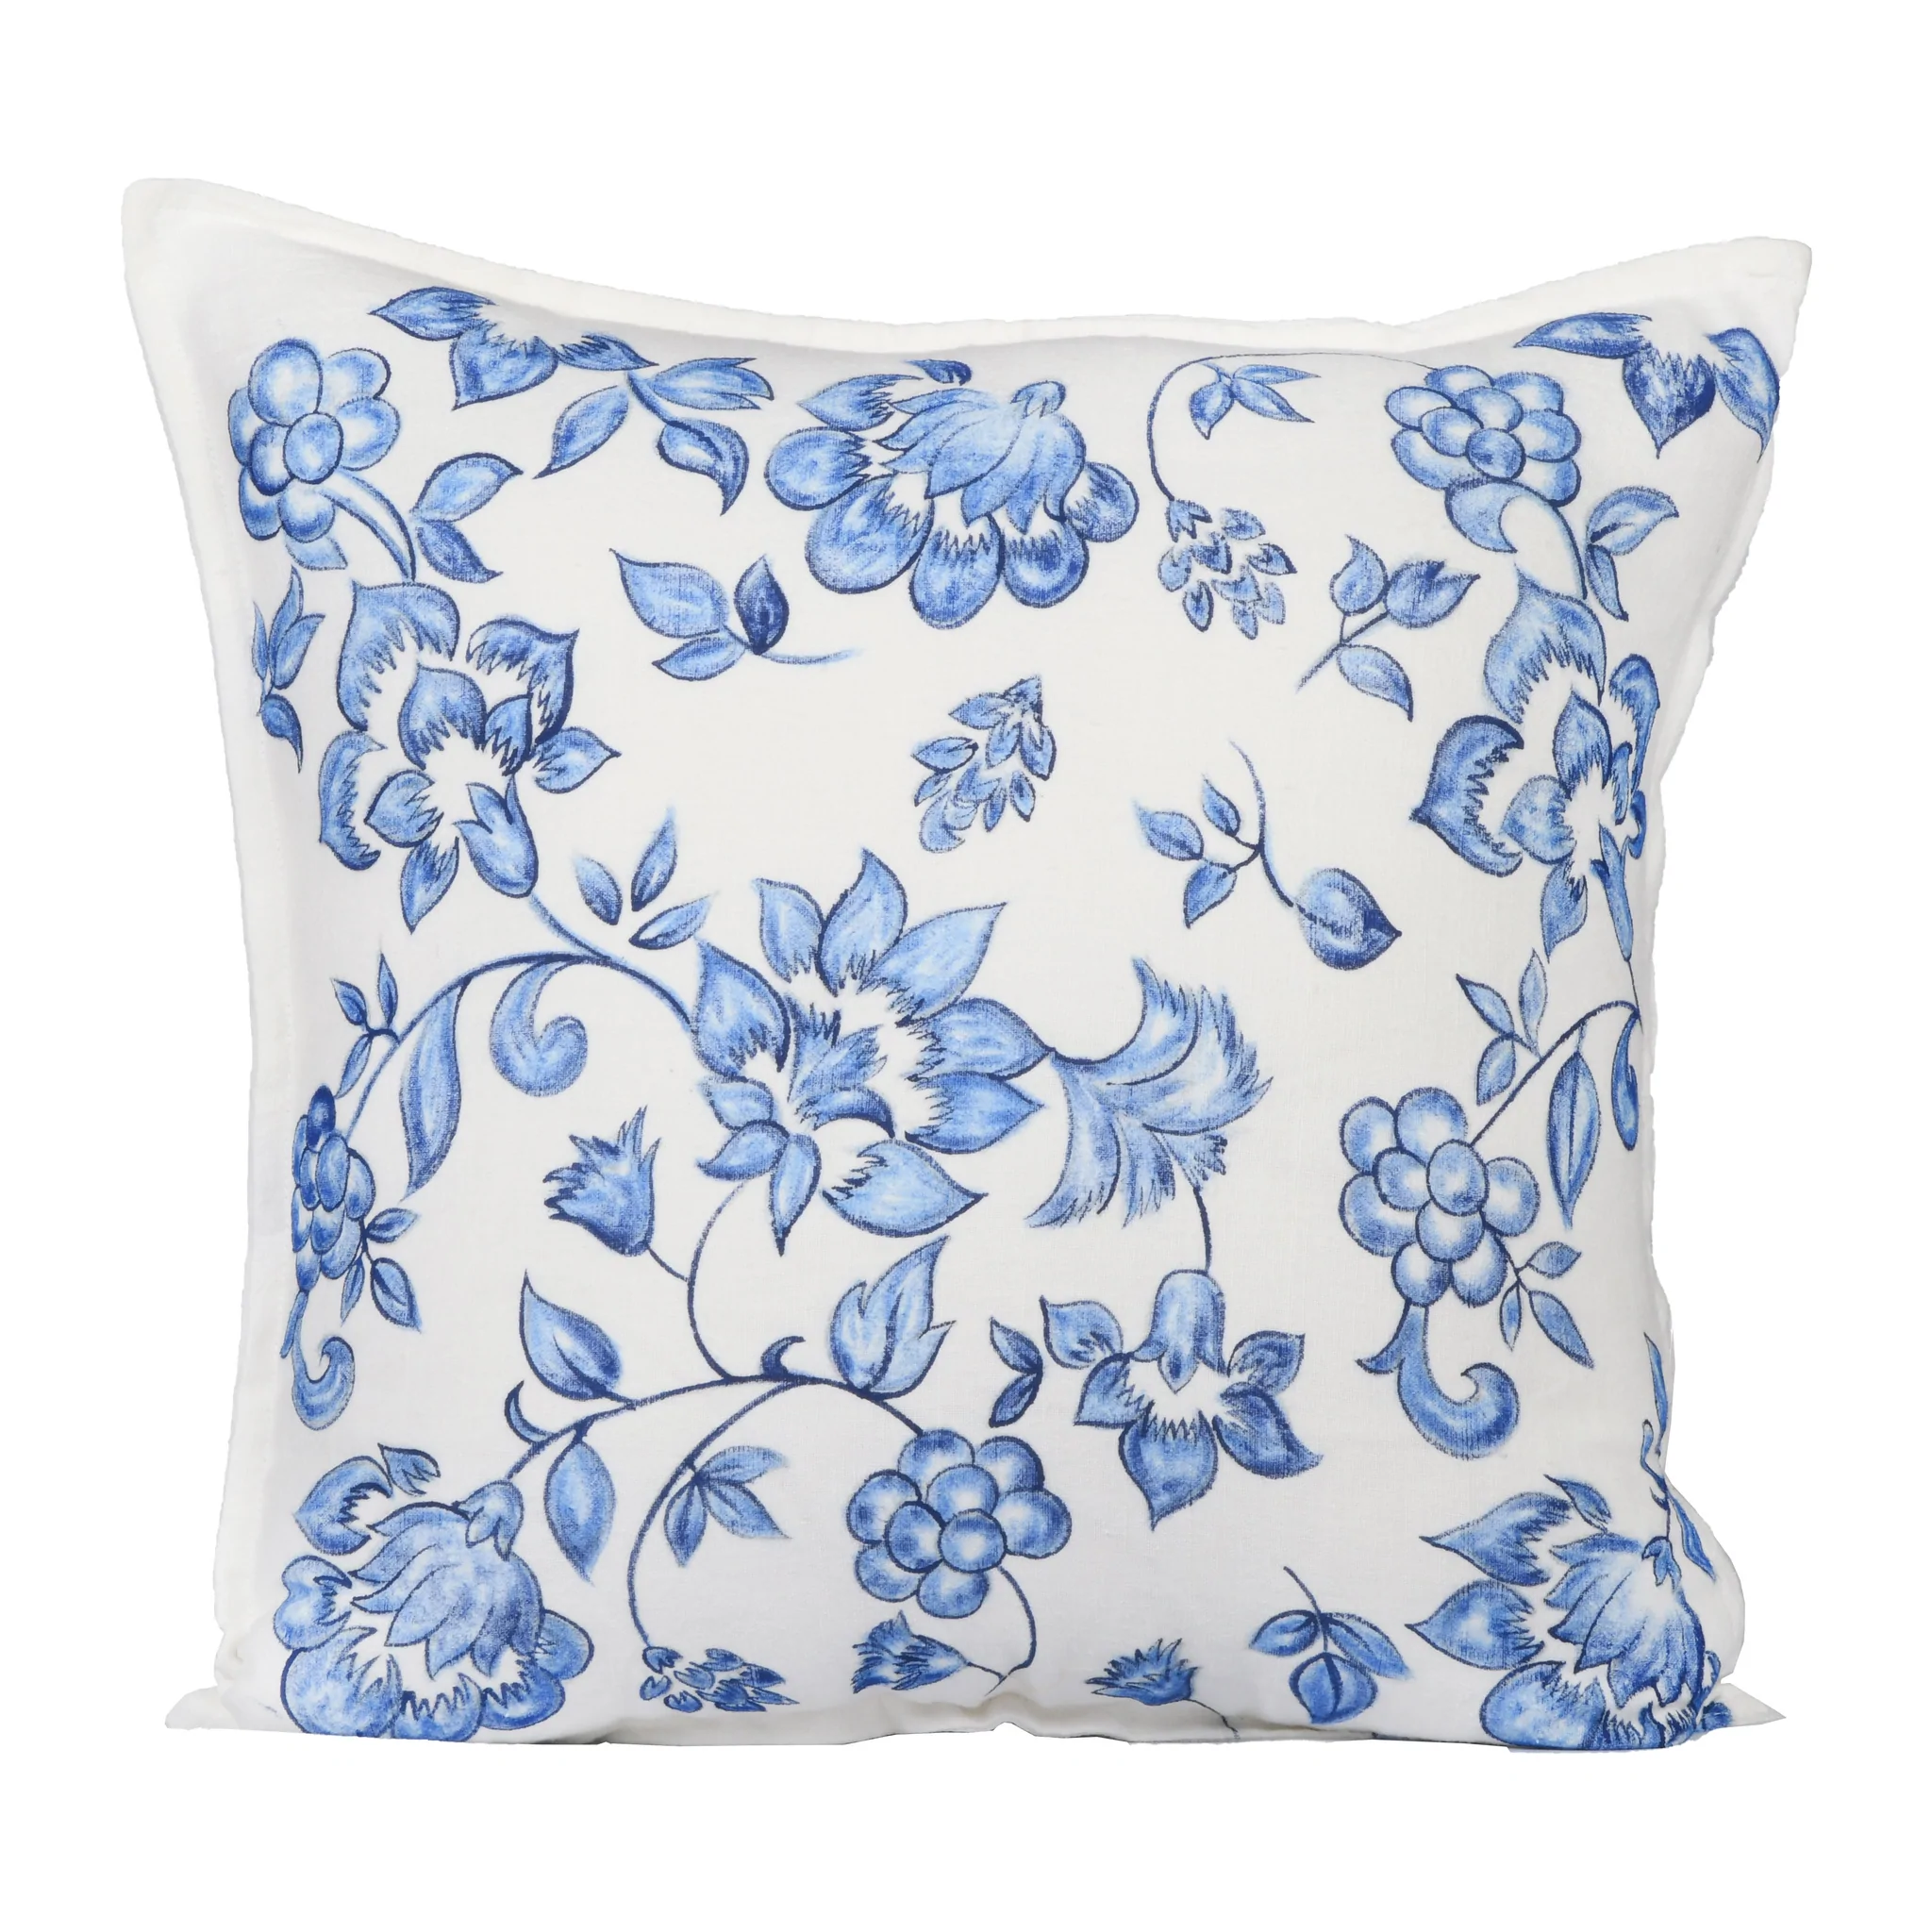 Blue Pottery Handpainted Cushion Cover 1024×1024@2x